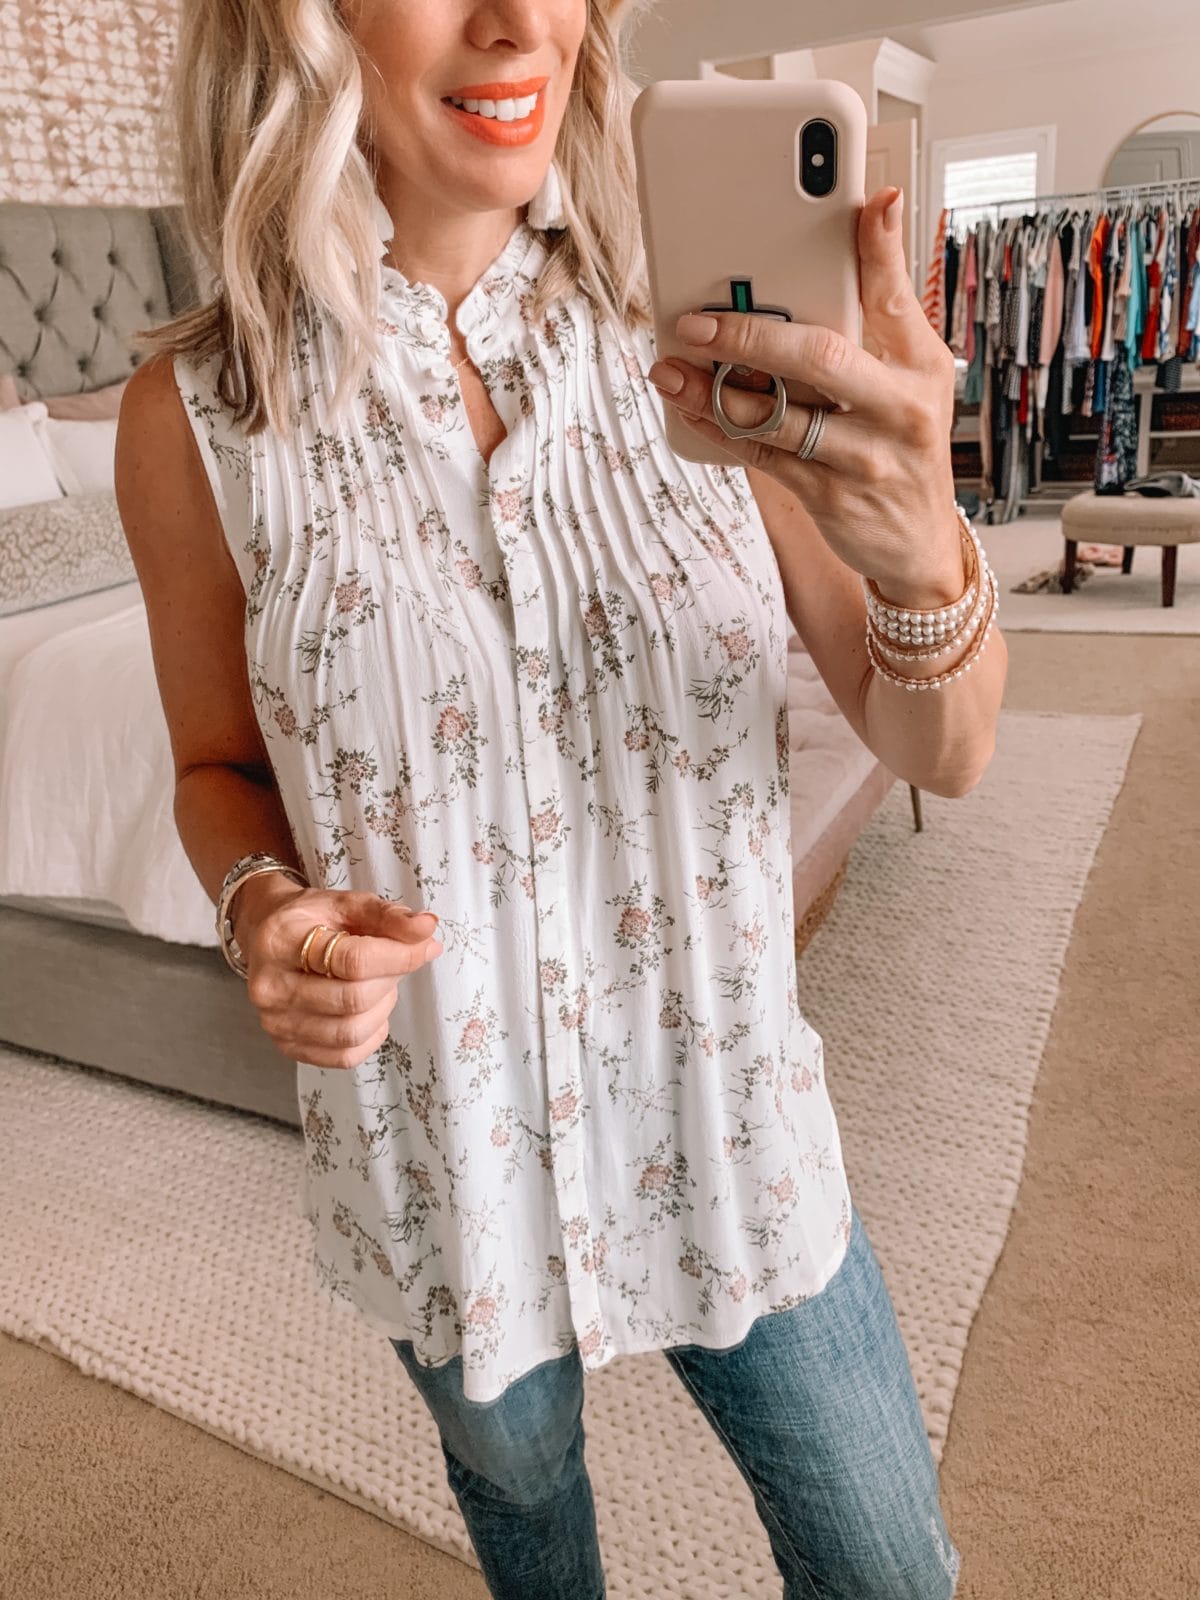 floral tank and jeans